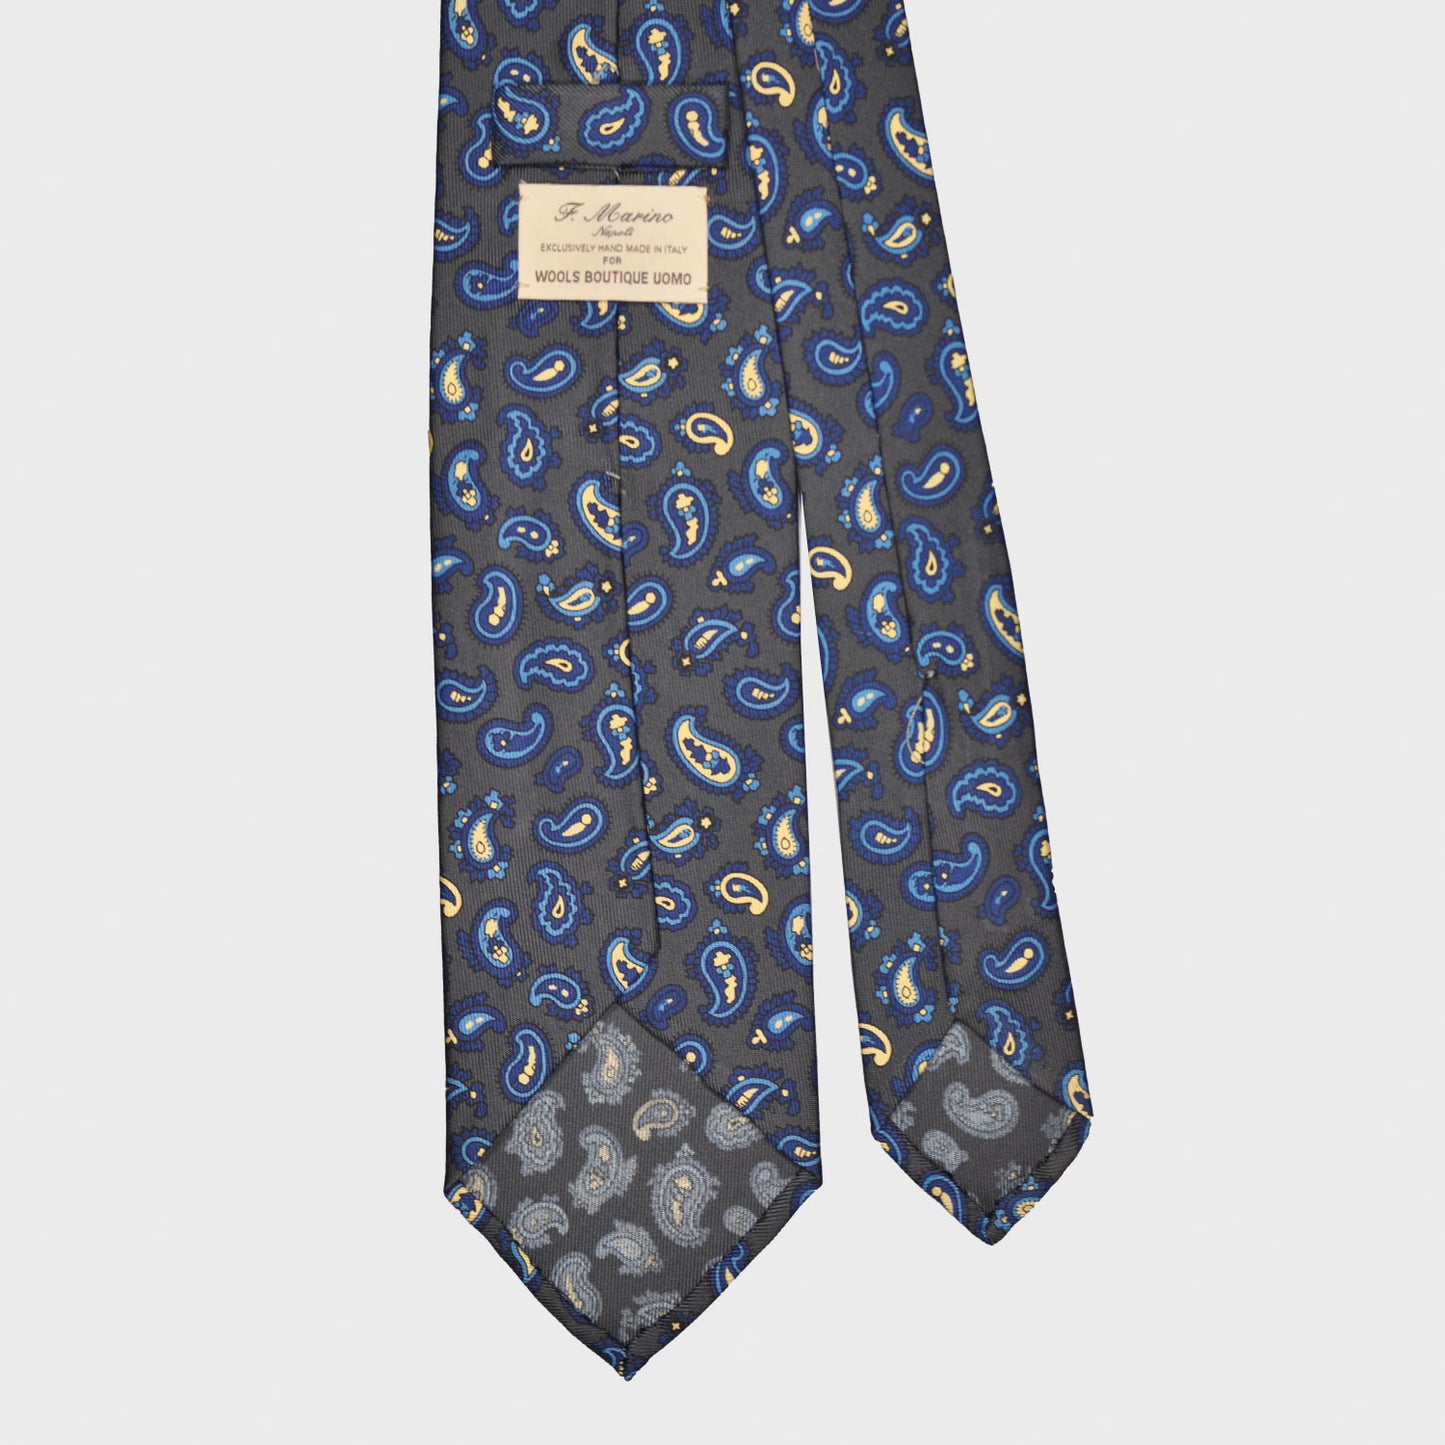 Load image into Gallery viewer, F.Marino Silk Tie 3 Folds Paisley Carbon Grey-Wools Boutique Uomo
